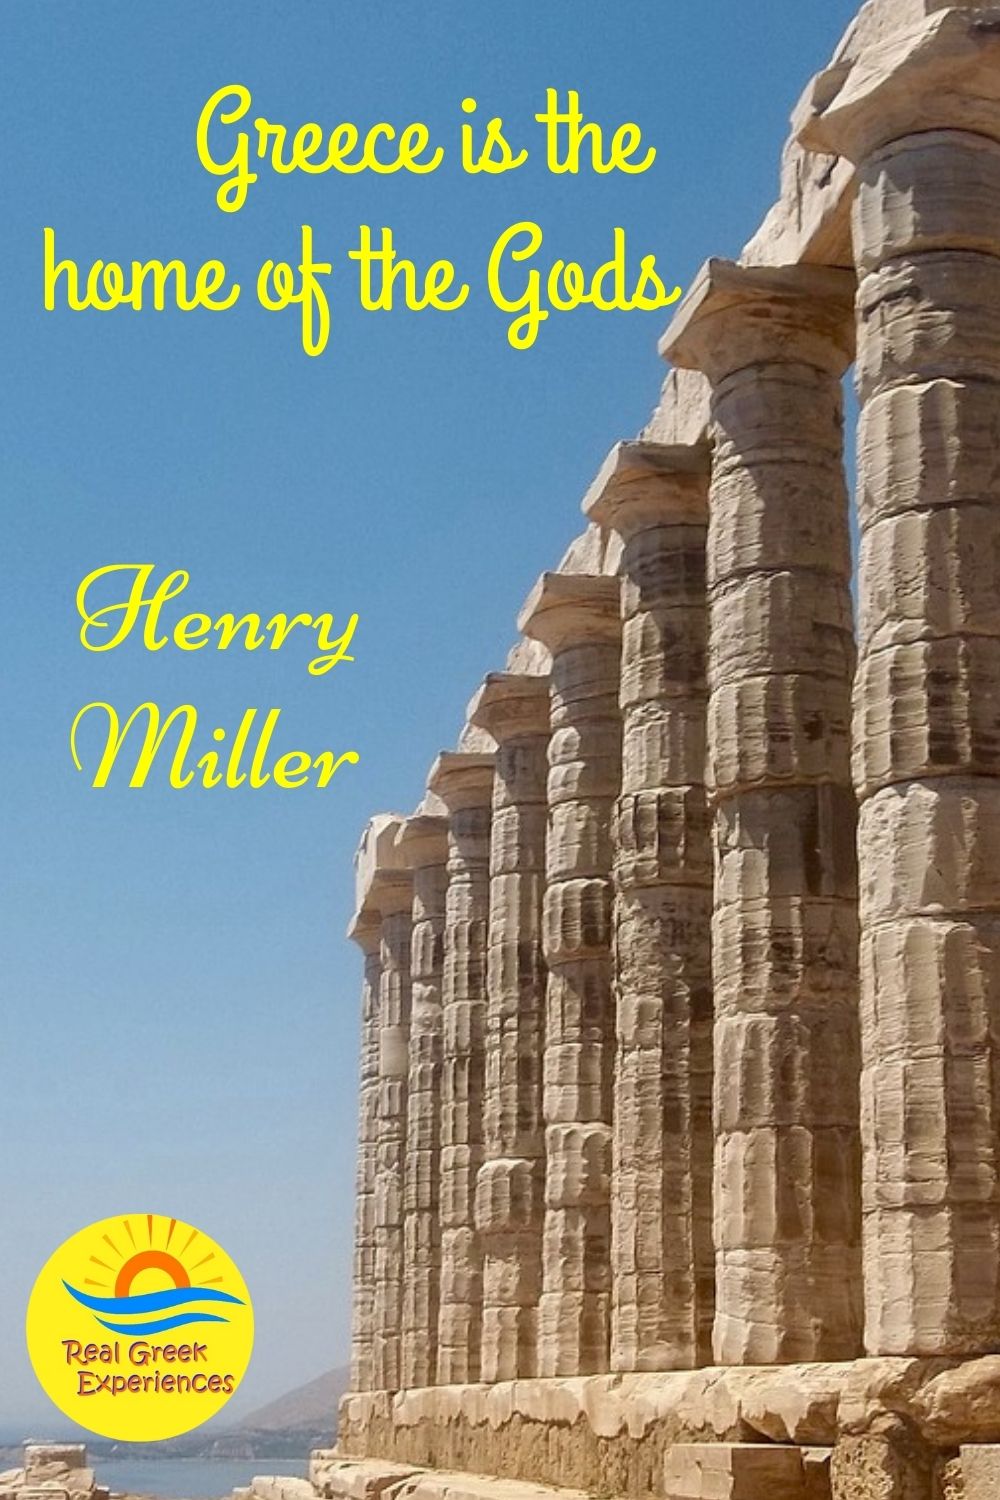 Quotes about Greece - Greece is the home of the Gods - Henry Miller